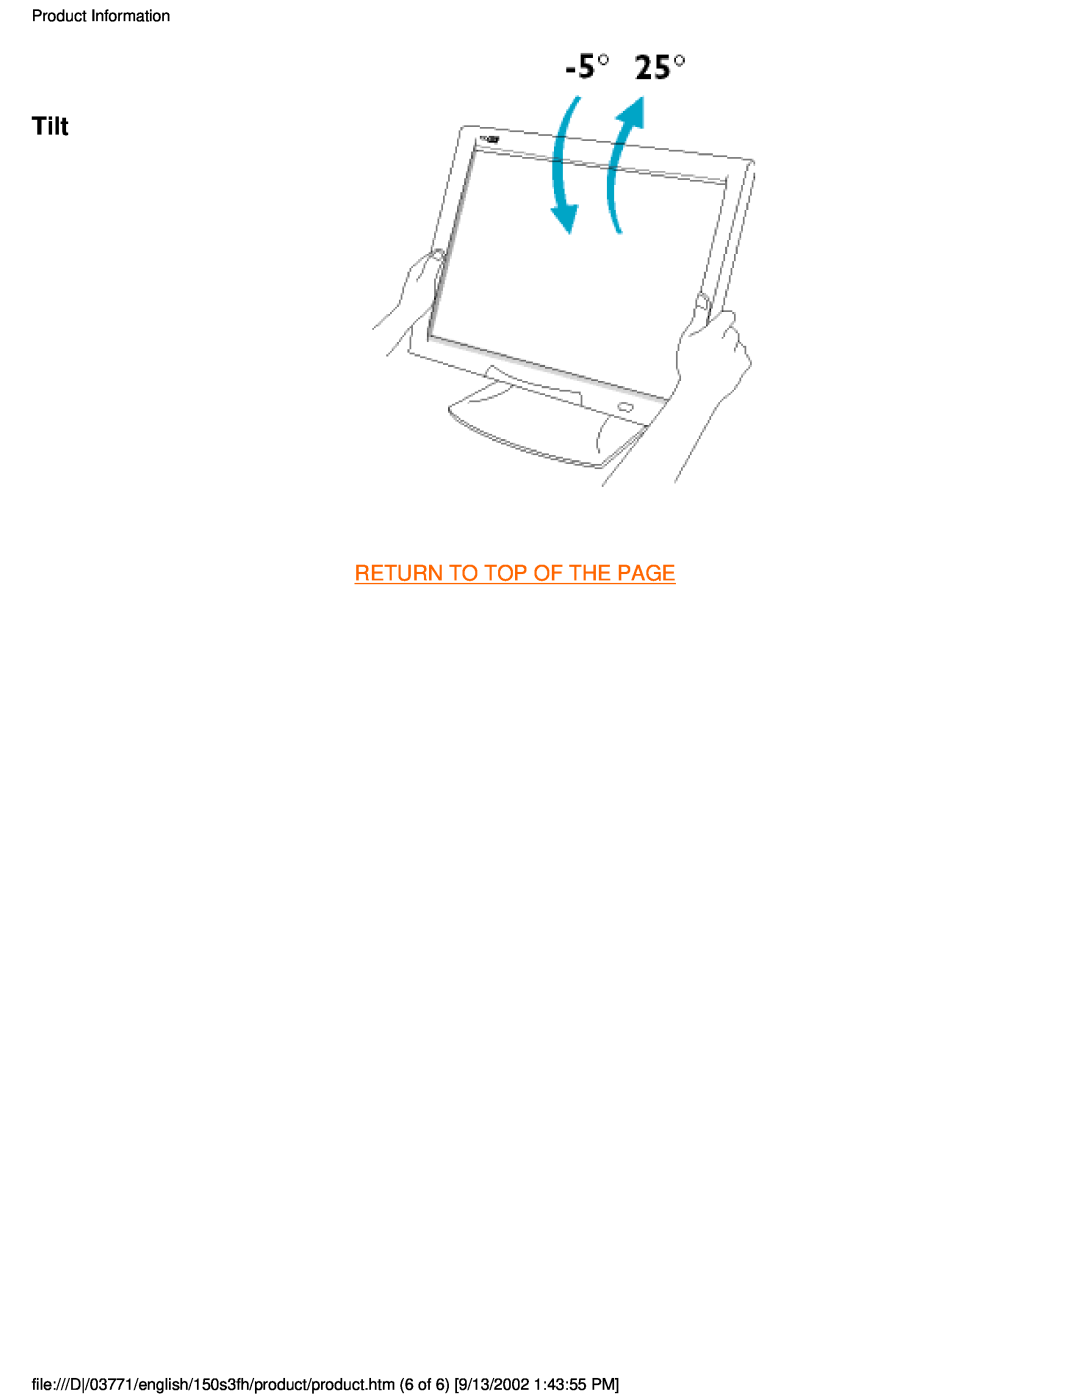 Philips 150S3F user manual Tilt, Return To Top Of The Page, Product Information 